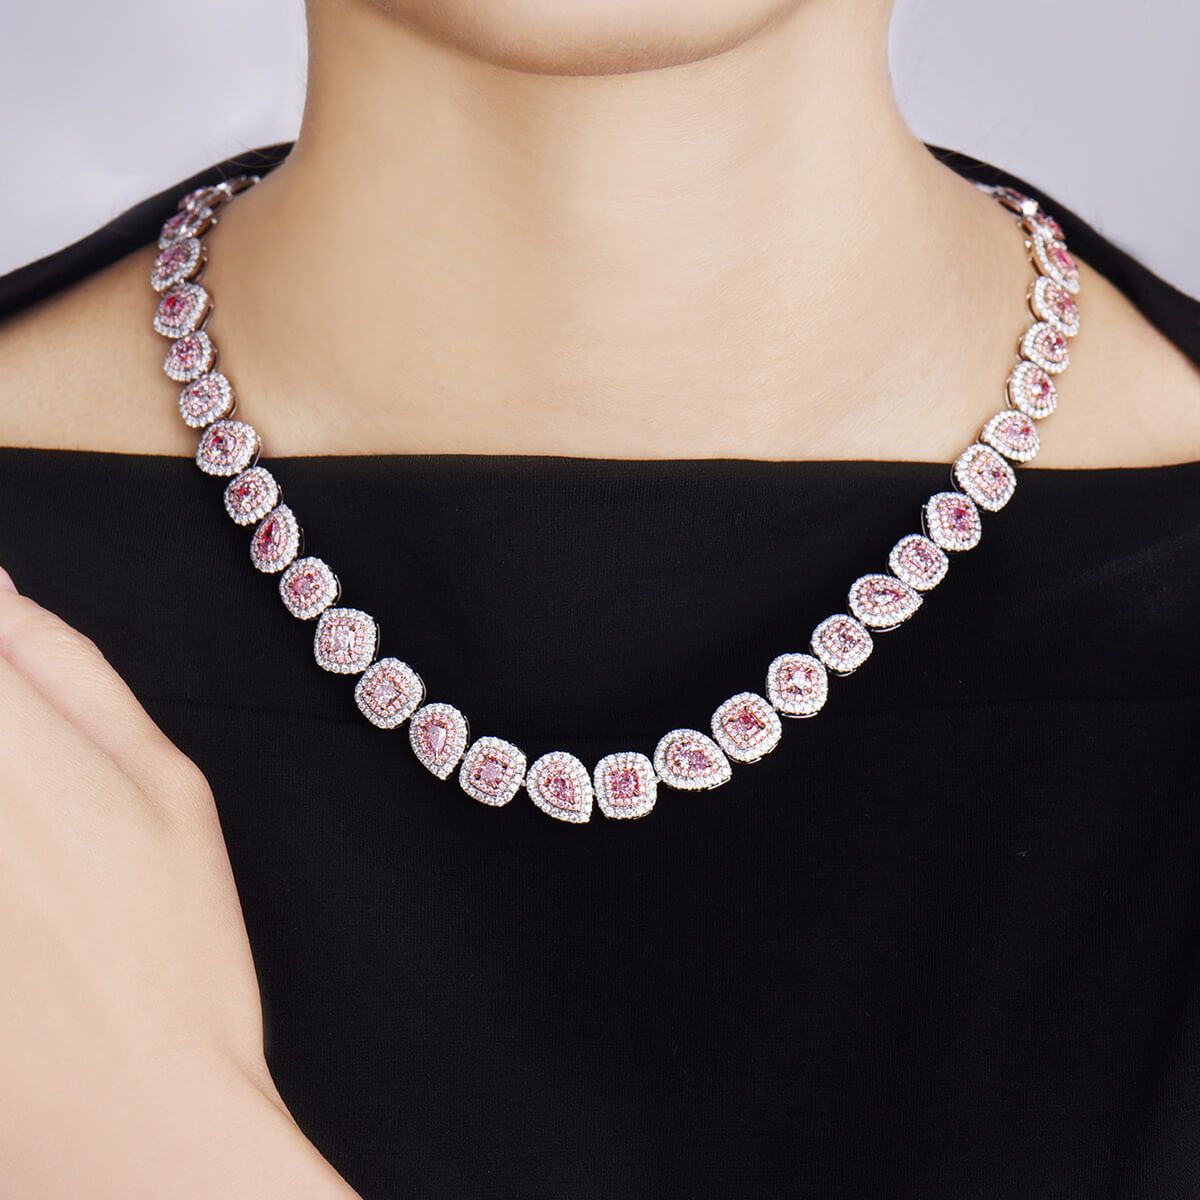 Very Light Pink Diamond Necklace, 17.40 Ct. TW, Mix shape, GIA Certified, JCNF05396001